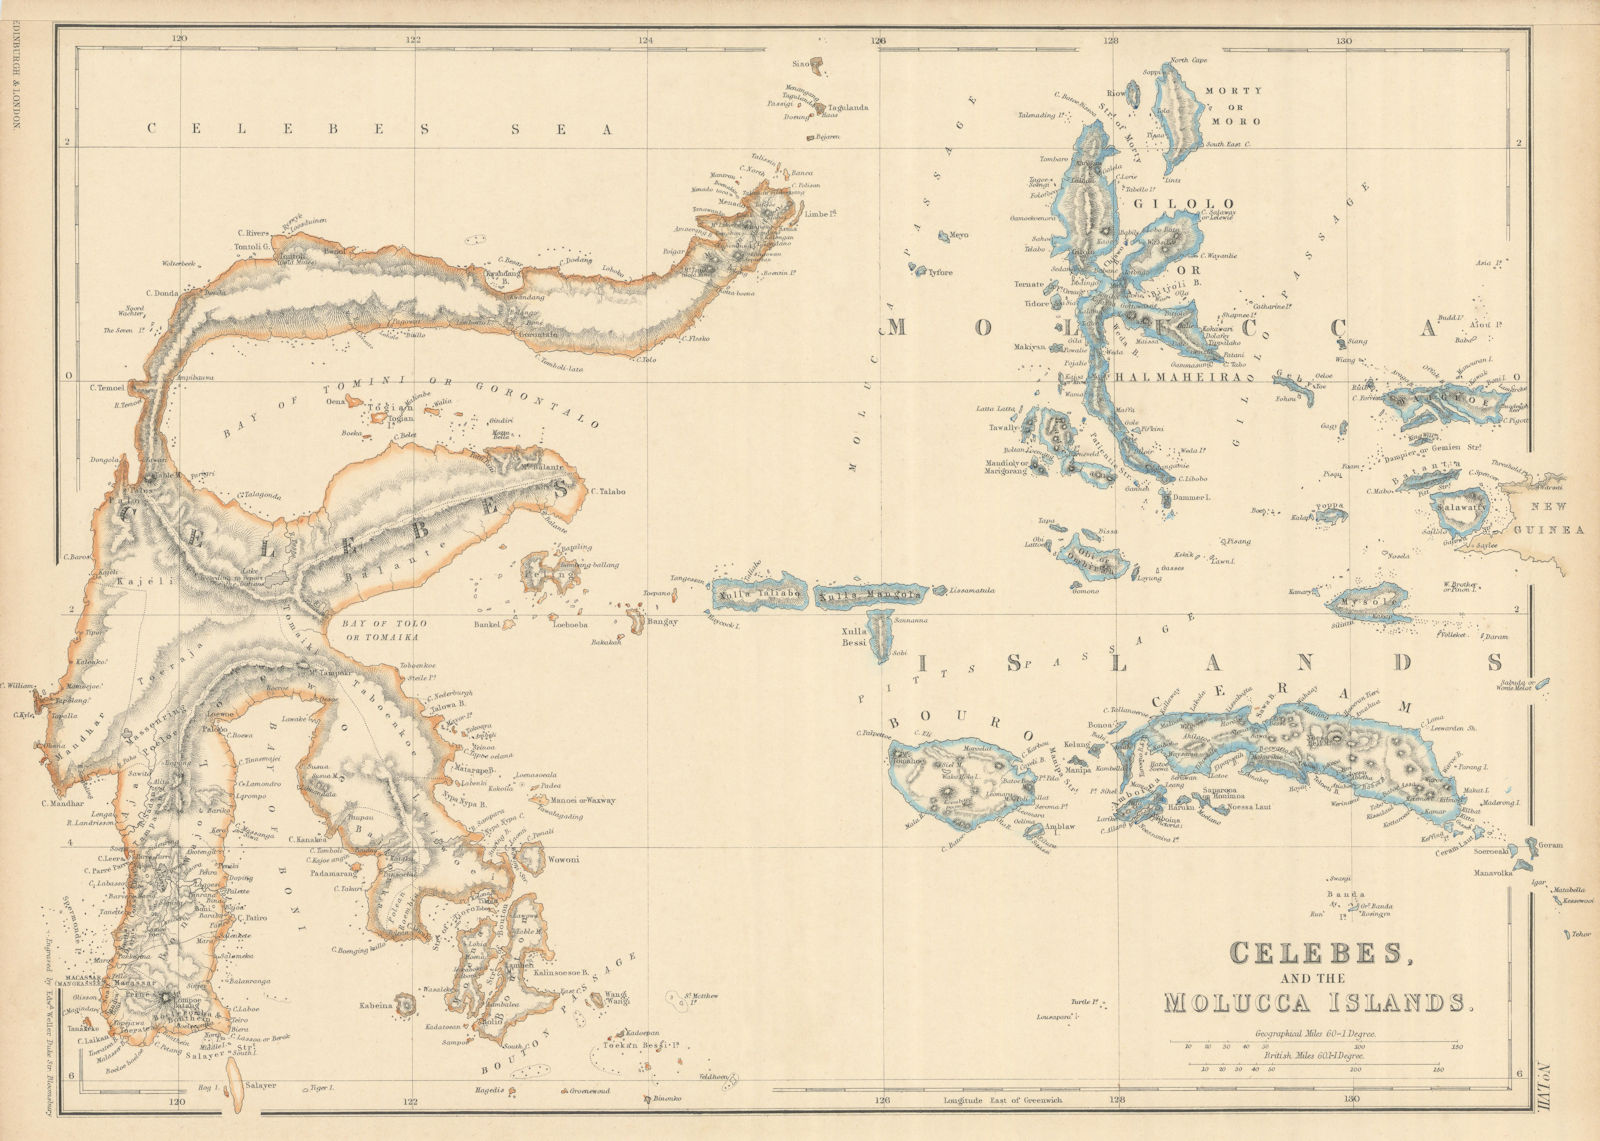 Celebes and the Molucca Islands by Edward Weller. Indonesia Sulawesi 1860 map